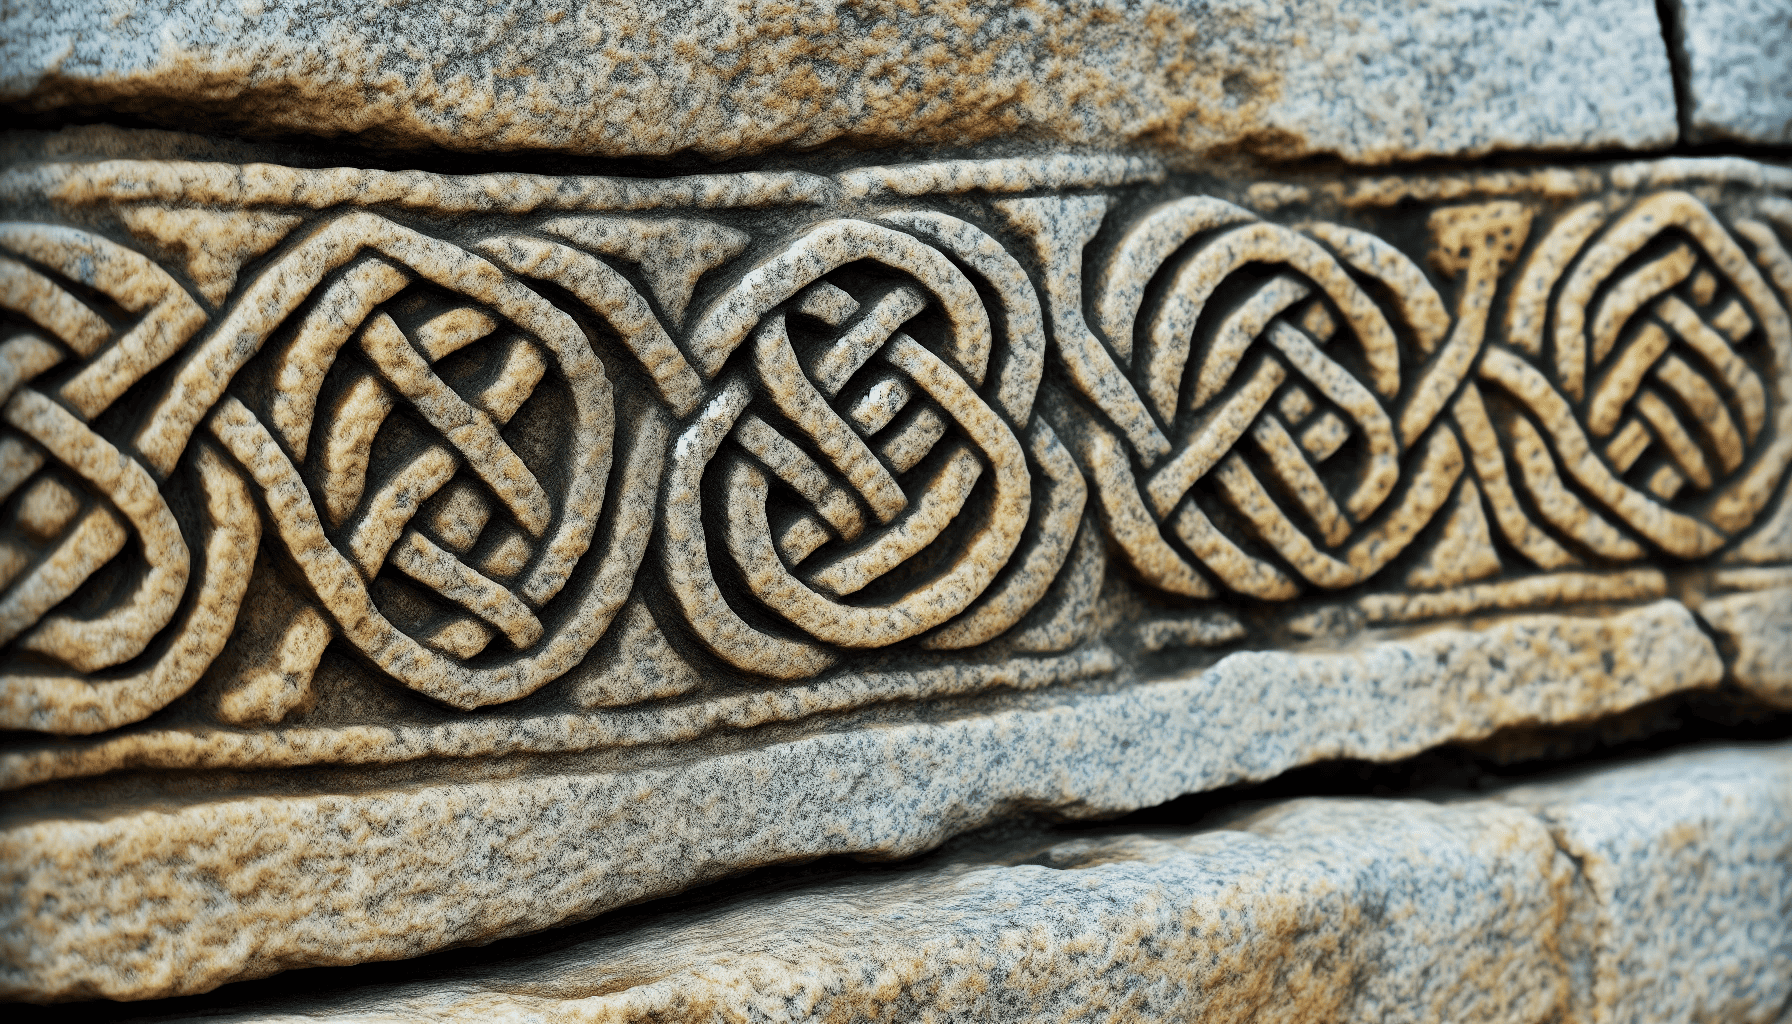 Ancient stone carvings featuring trinity knot motifs